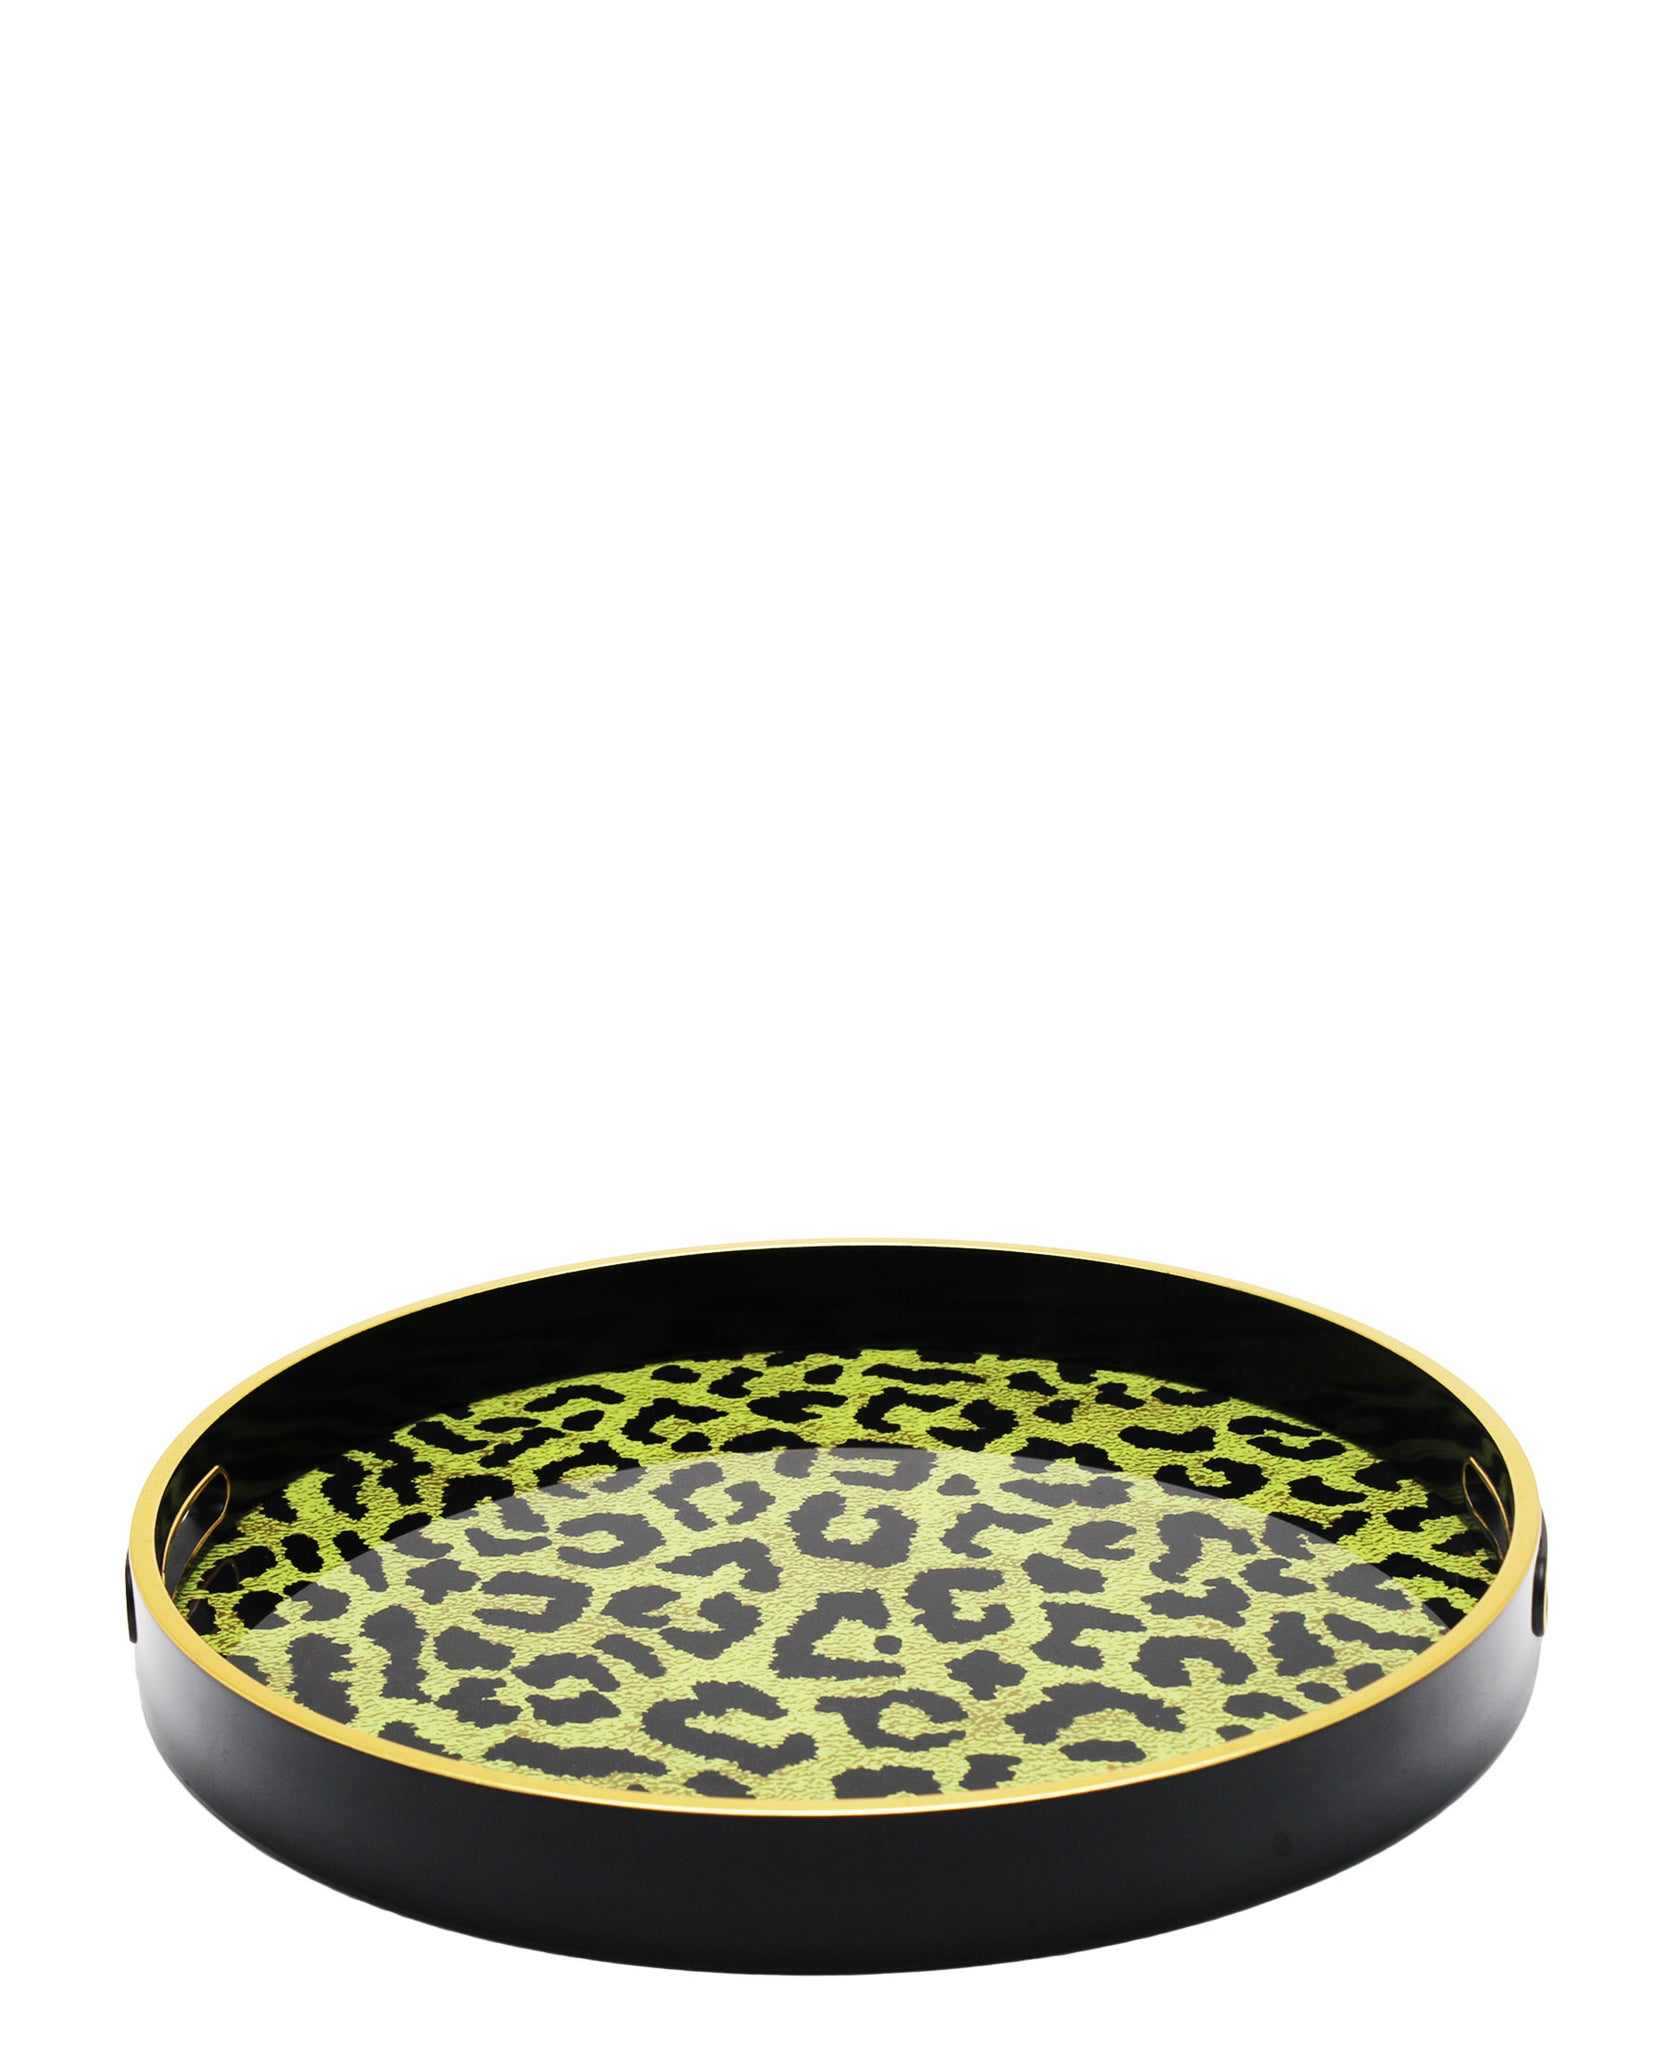 Urban Decor Glass 2 Piece Tray With Marble Finish - Yellow